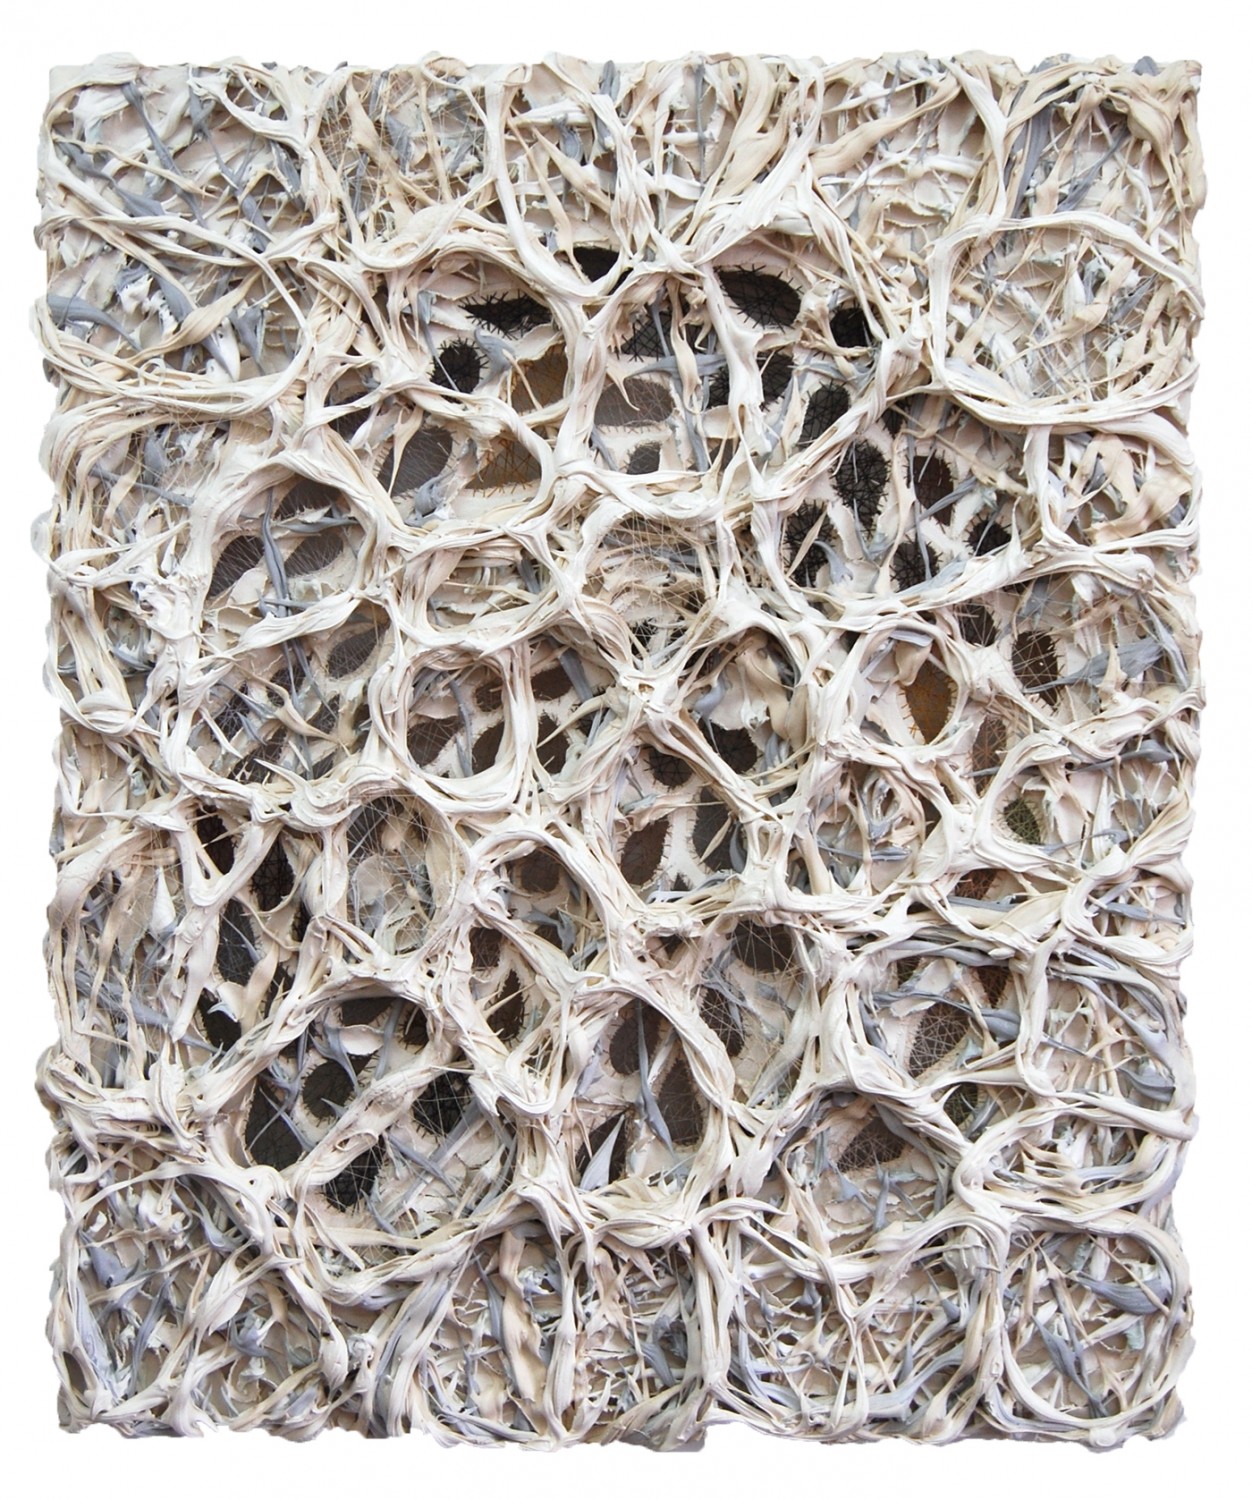 Flesh and Bone, 2010, Ultralight, pigment dispersions, and thread on canvas, 34 x 28 inches, private collection